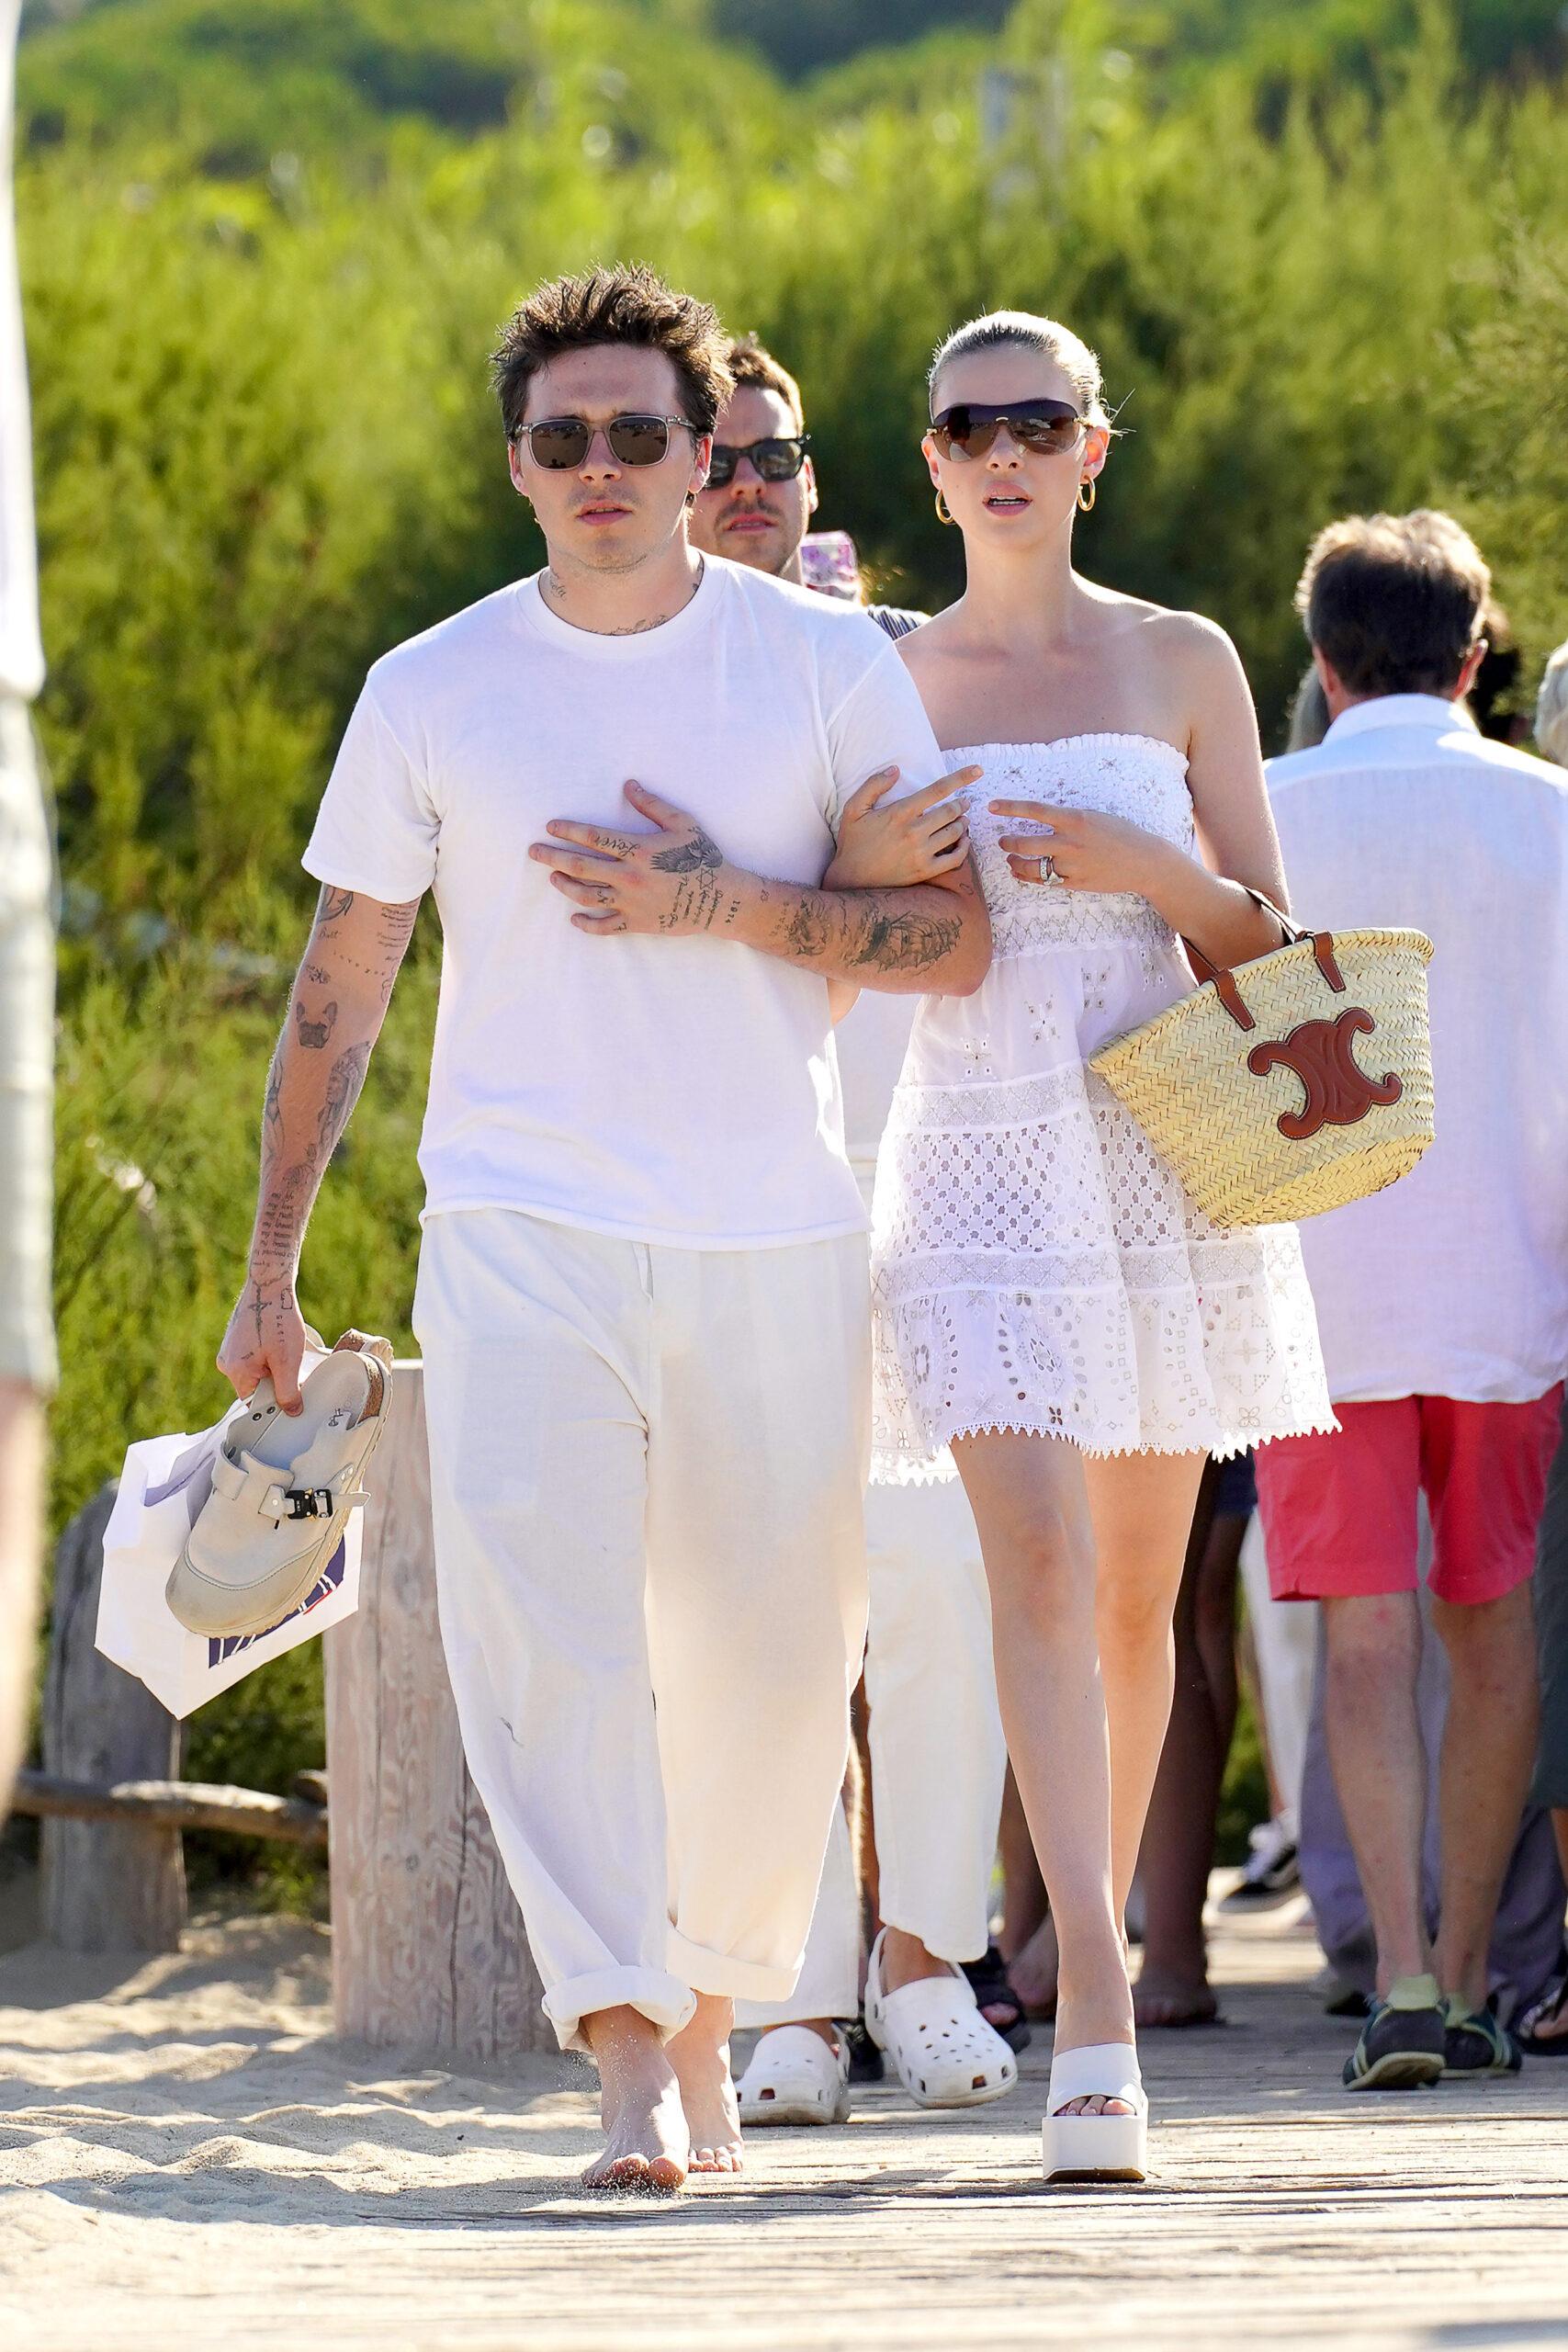 Brooklyn Beckham and his wife Nicola Peltz at Club 55 during holidays in St-Tropez